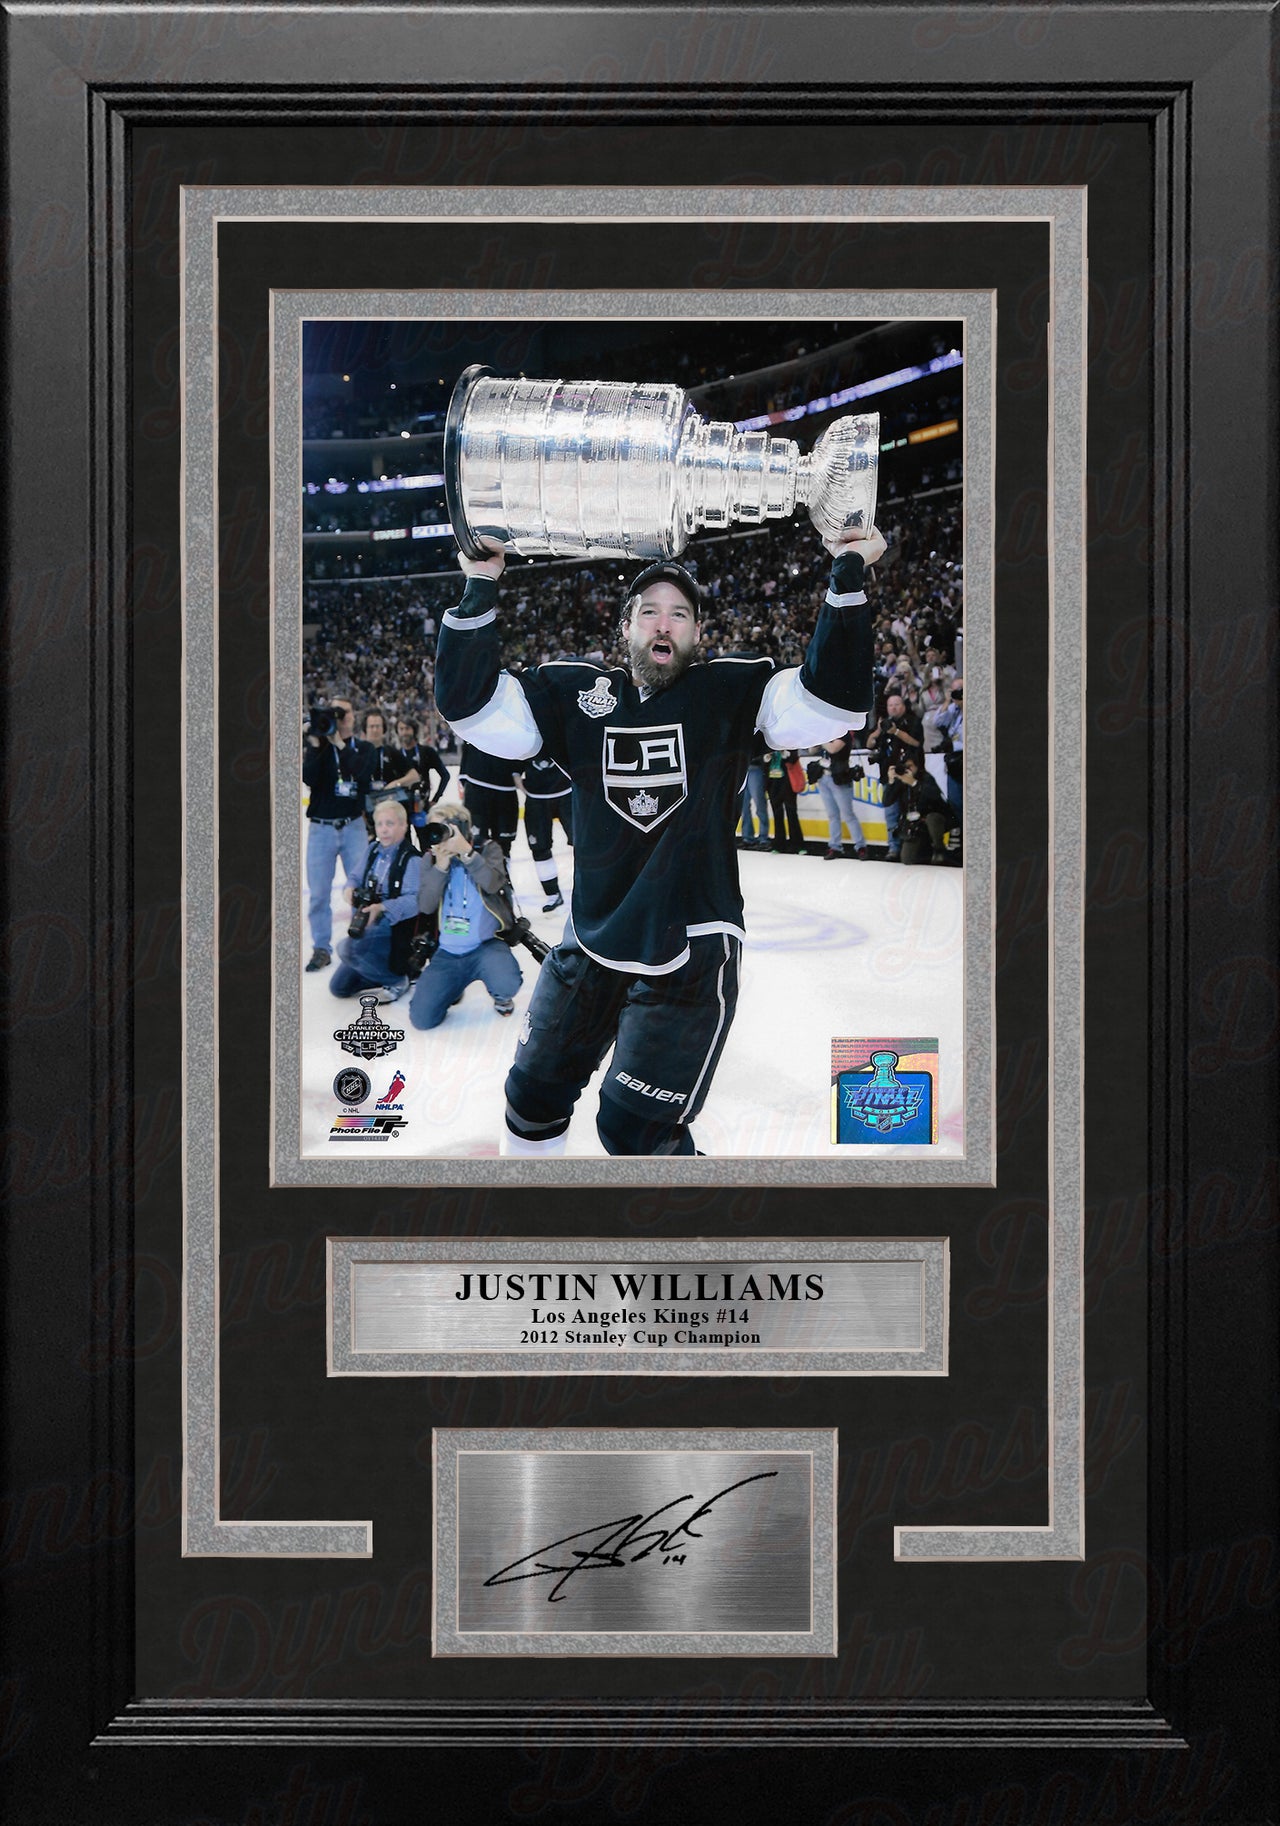 Justin Williams 2012 Stanley Cup Trophy Los Angeles Kings 8x10 Framed Photo with Engraved Autograph